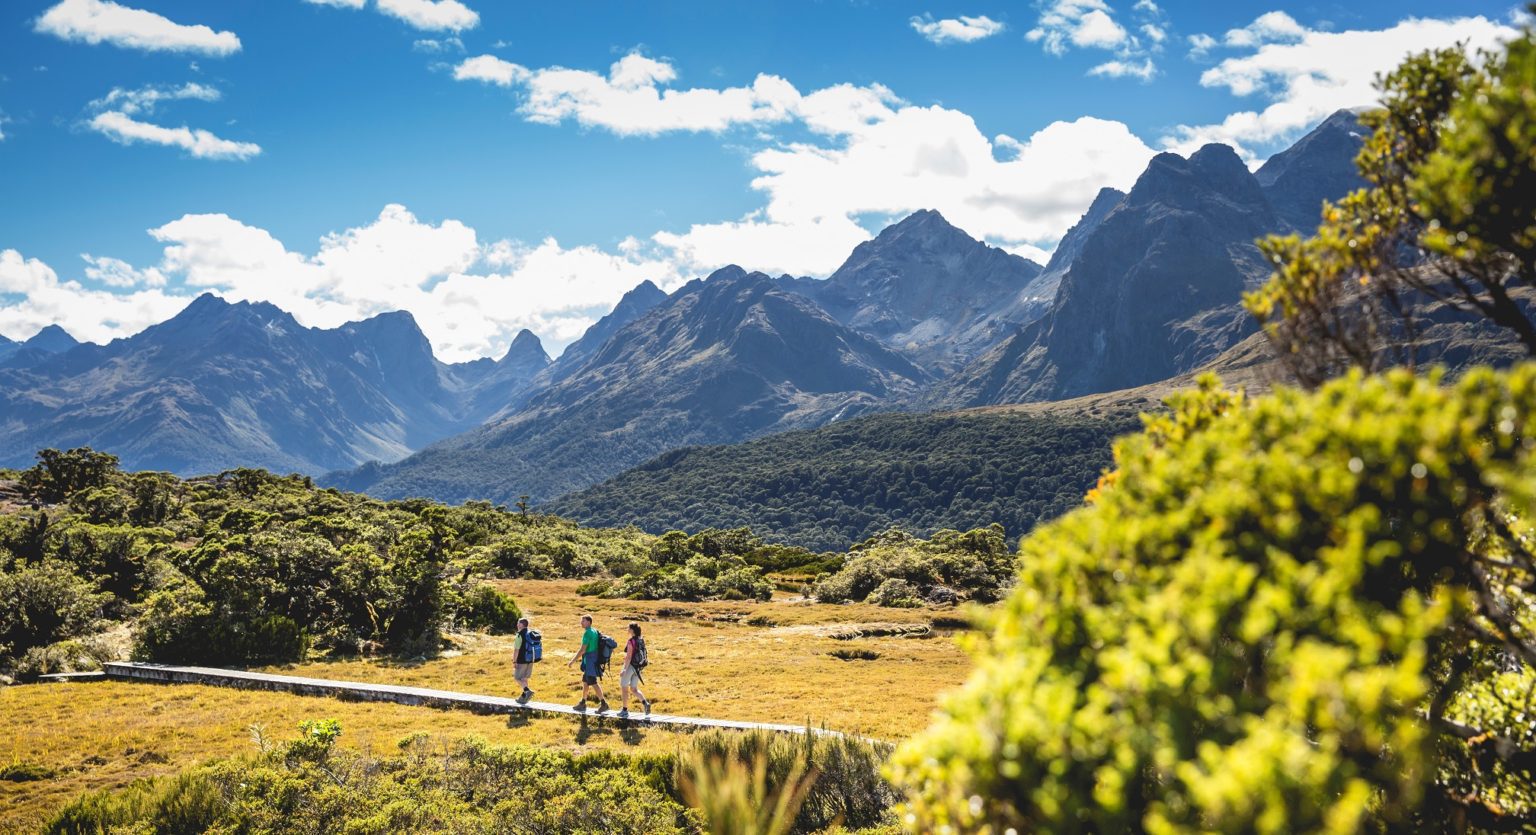 Hikers on New Zealand safari walk along the Routeburn Track with mountains in the background, taken by Fiordland Lodge